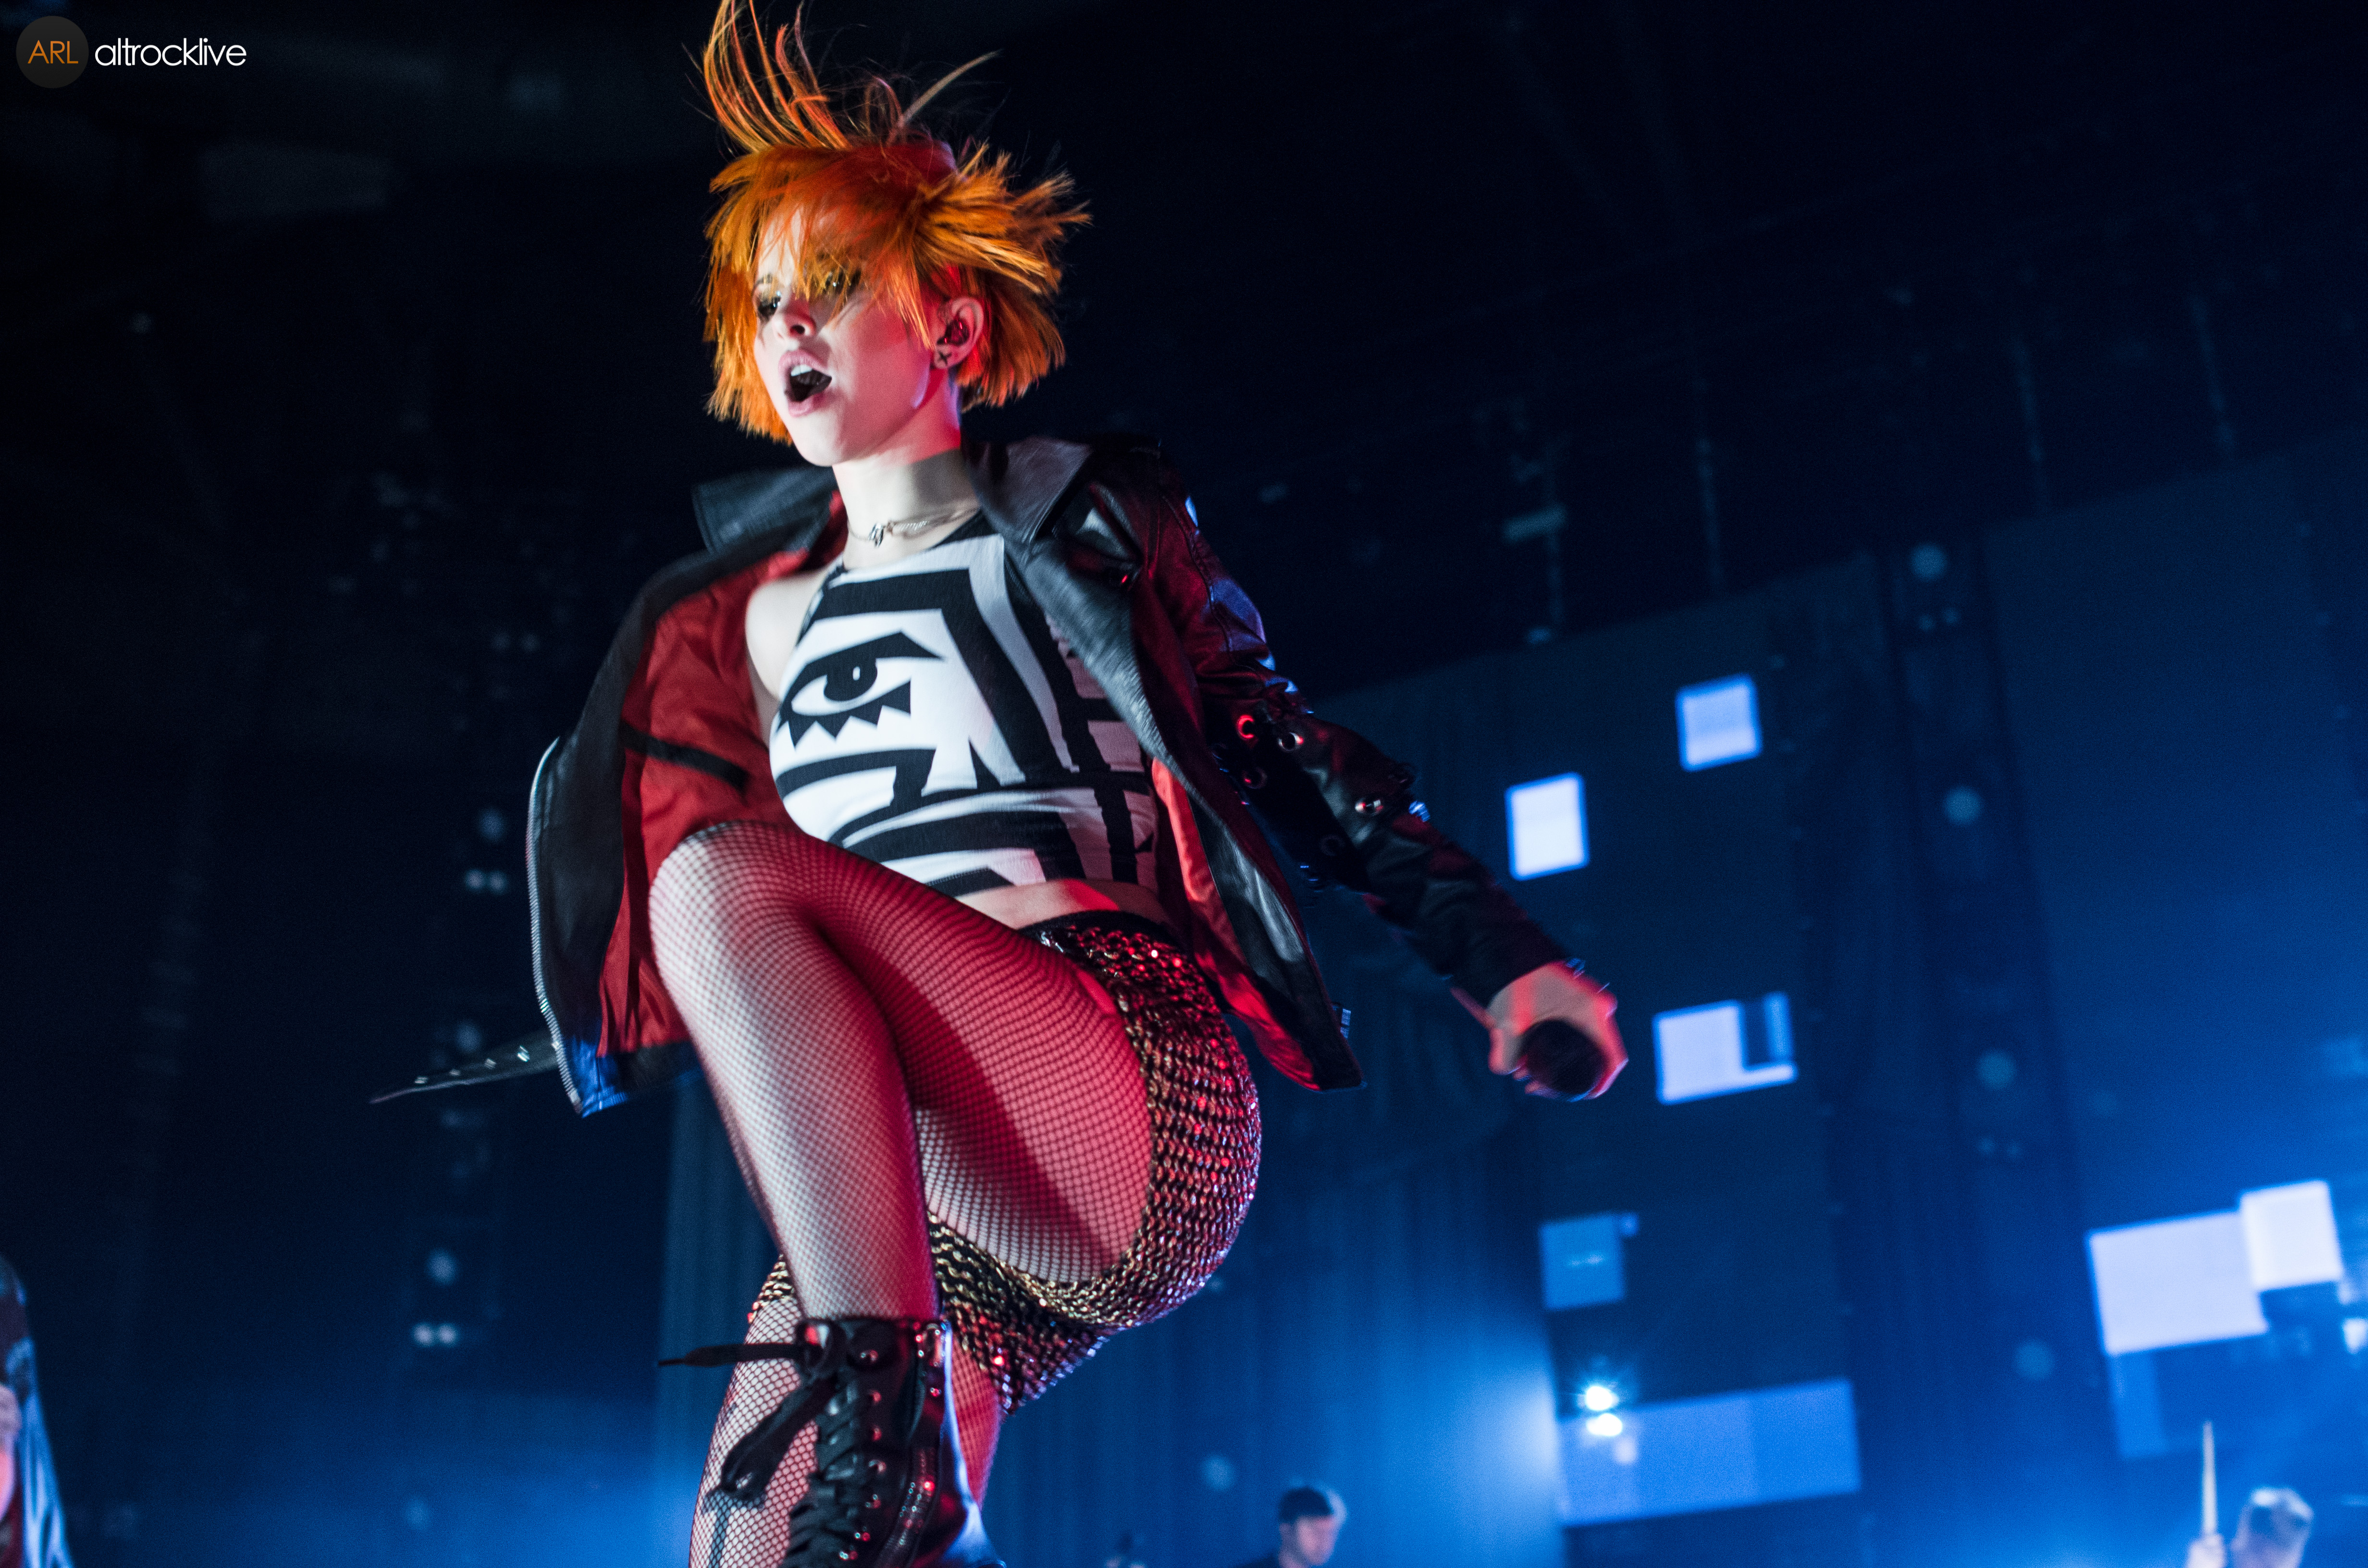 350+ Hayley Williams HD Wallpapers and Backgrounds